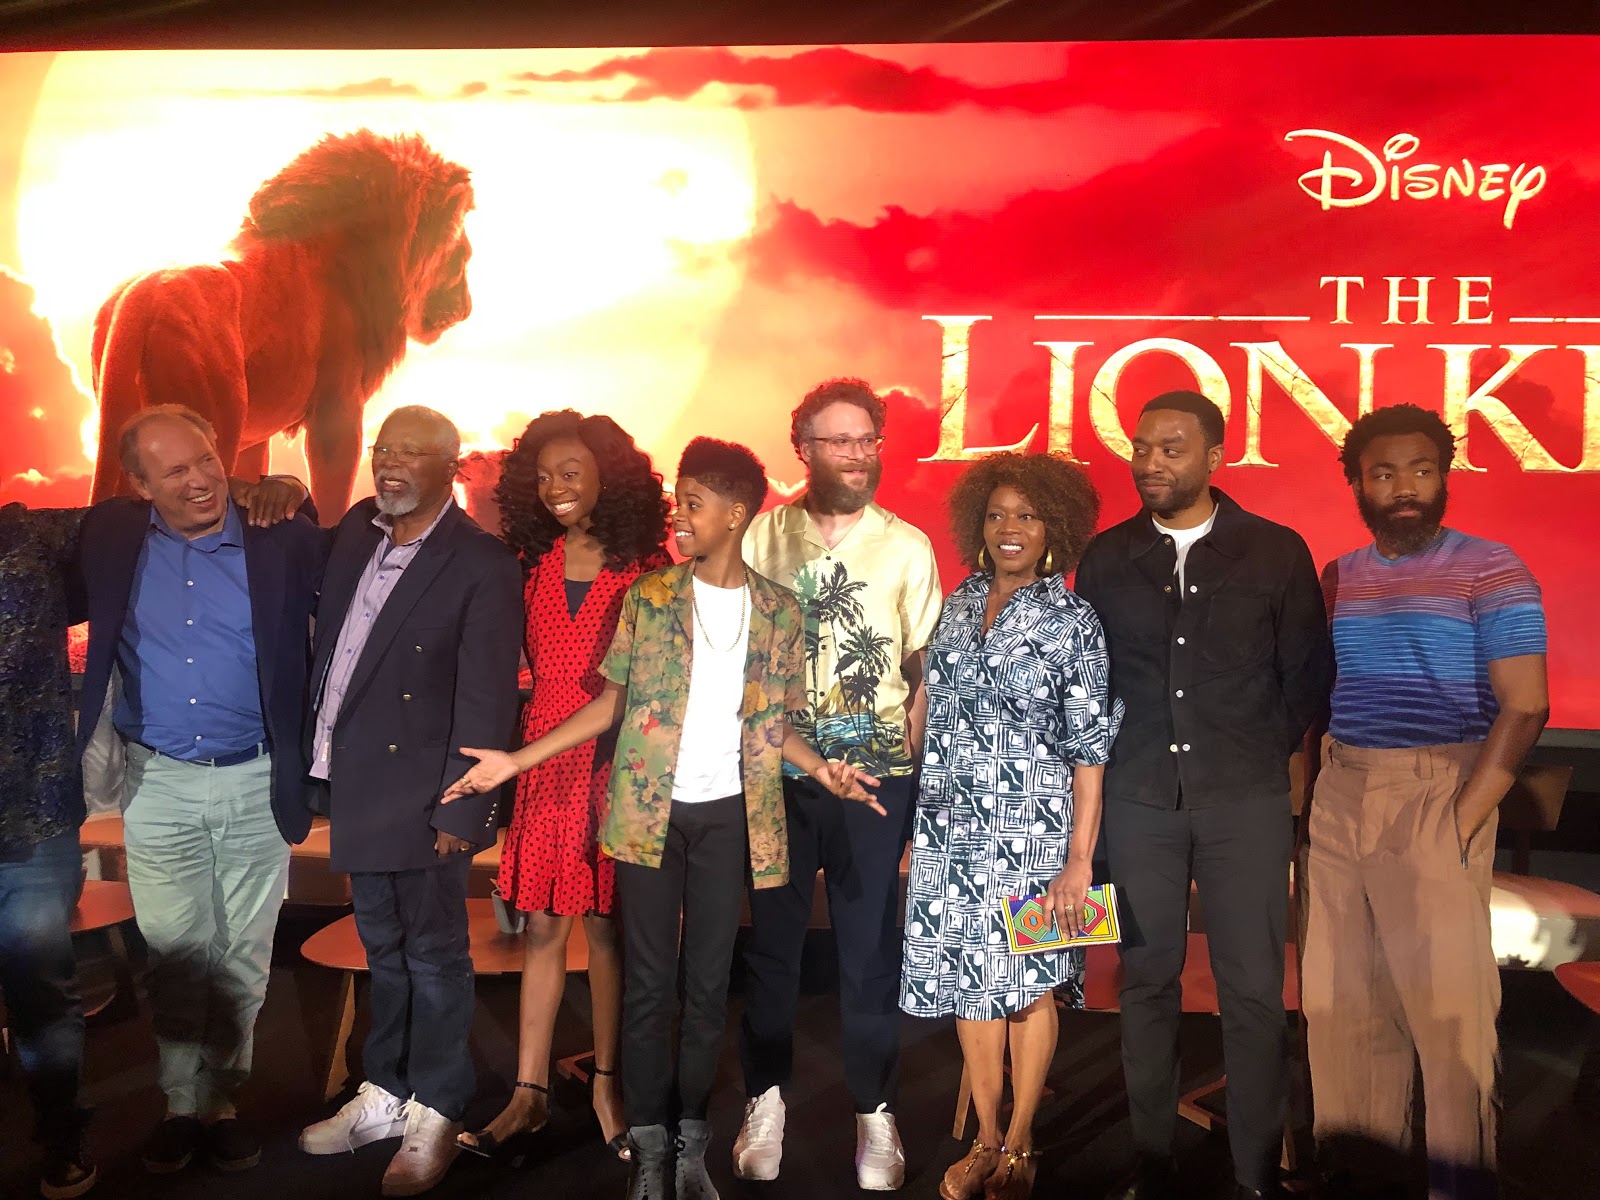 String string tuin rundvlees Video: Disney's "The Lion King" Cast and Creative Team Unite for Southern  California Press Conference - LaughingPlace.com